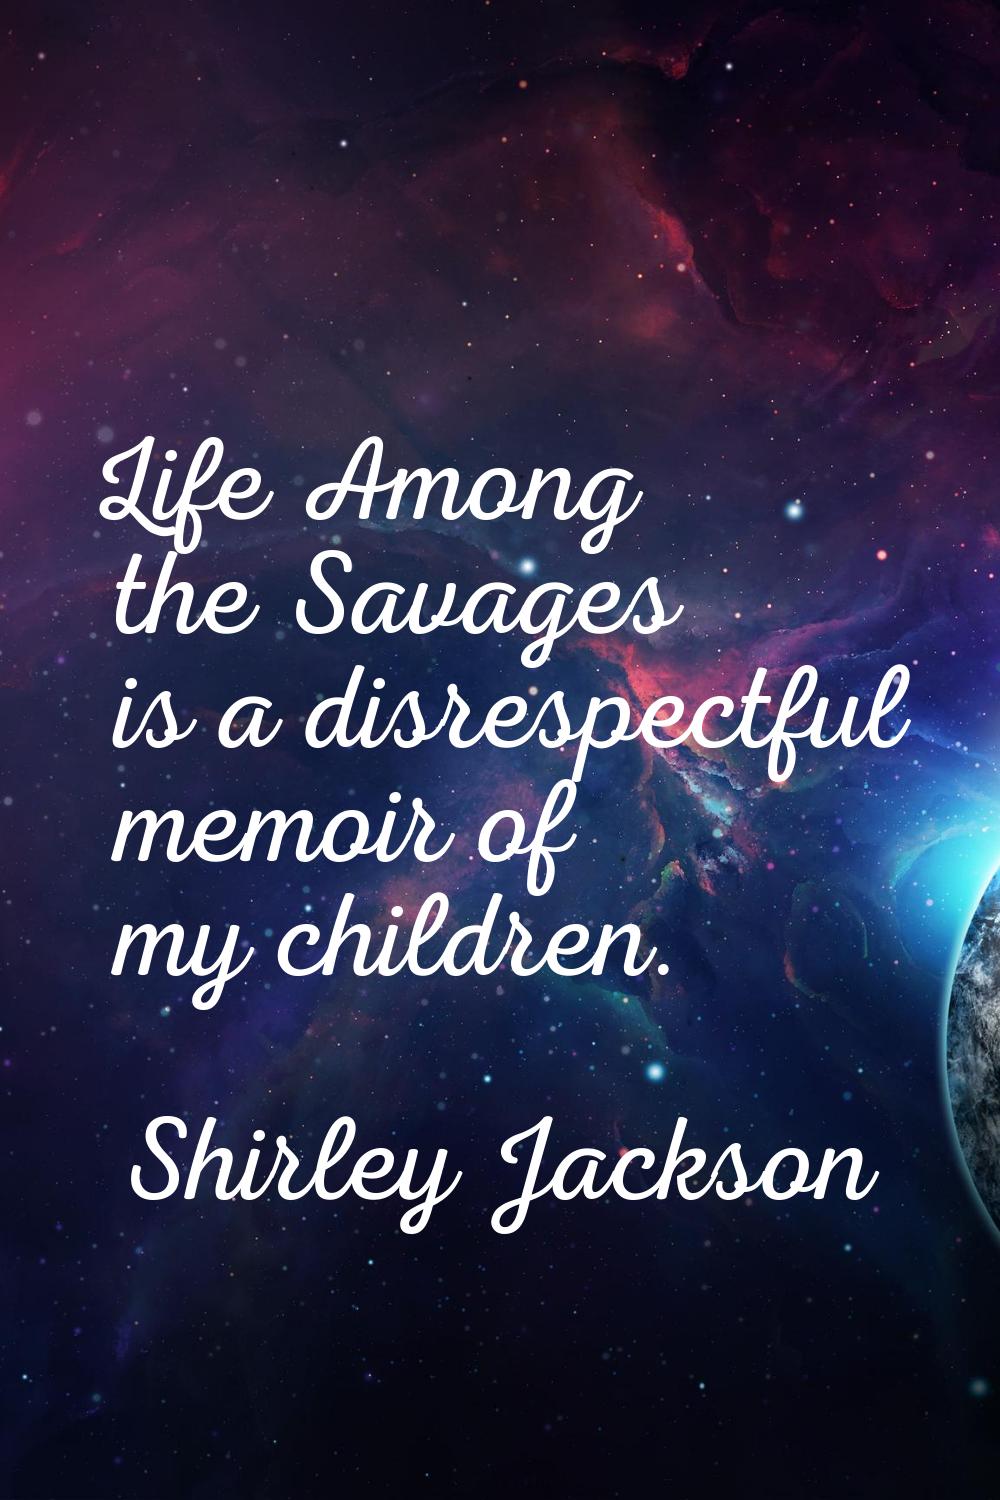 Life Among the Savages is a disrespectful memoir of my children.